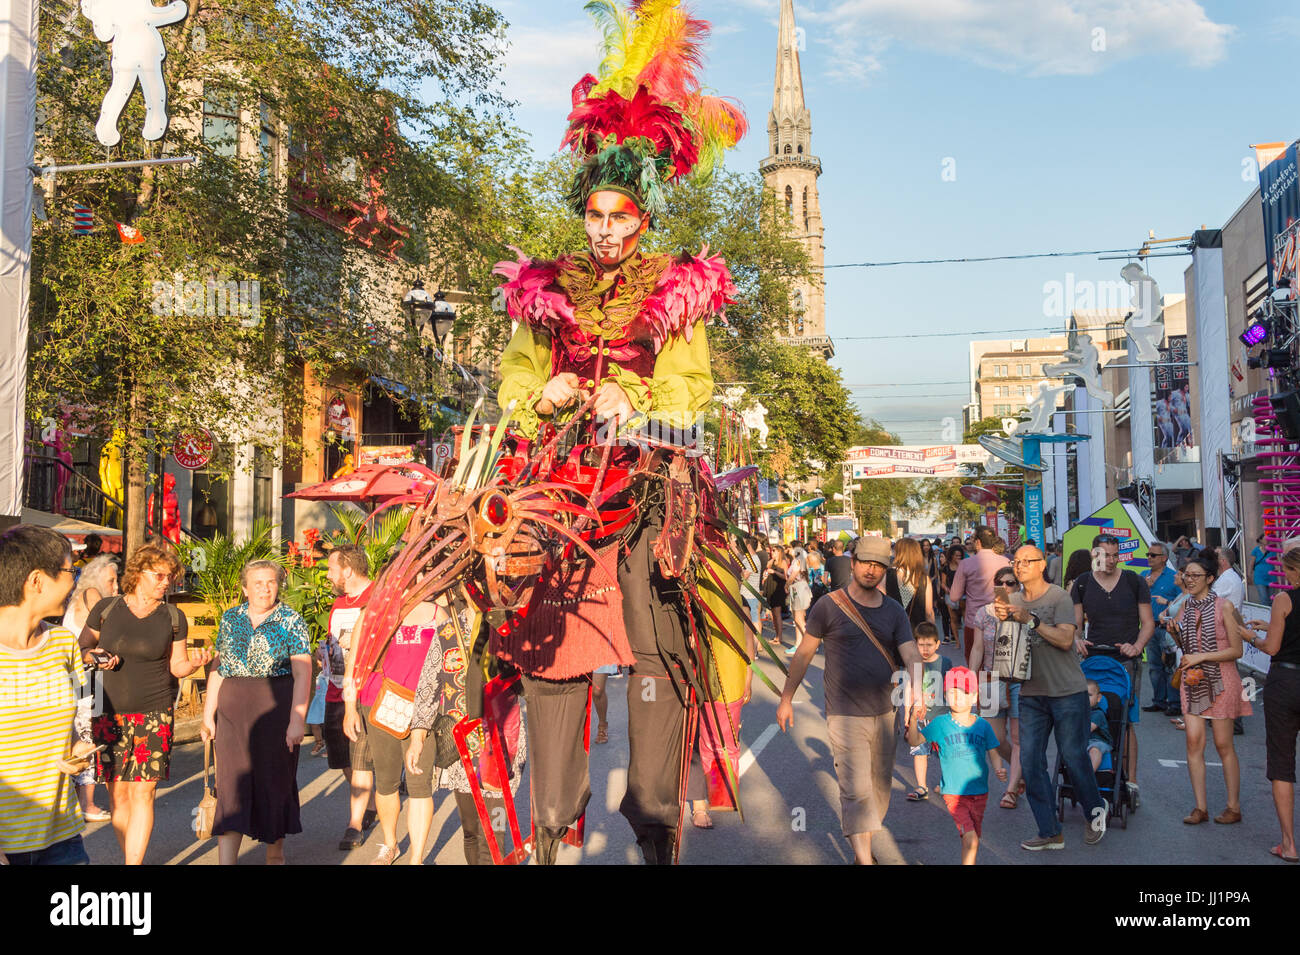 Montreal, Canada - 15 July 2017: 'Les Oiseaux' on Saint Denis Street during Montreal Circus Arts Festival 2017 Stock Photo